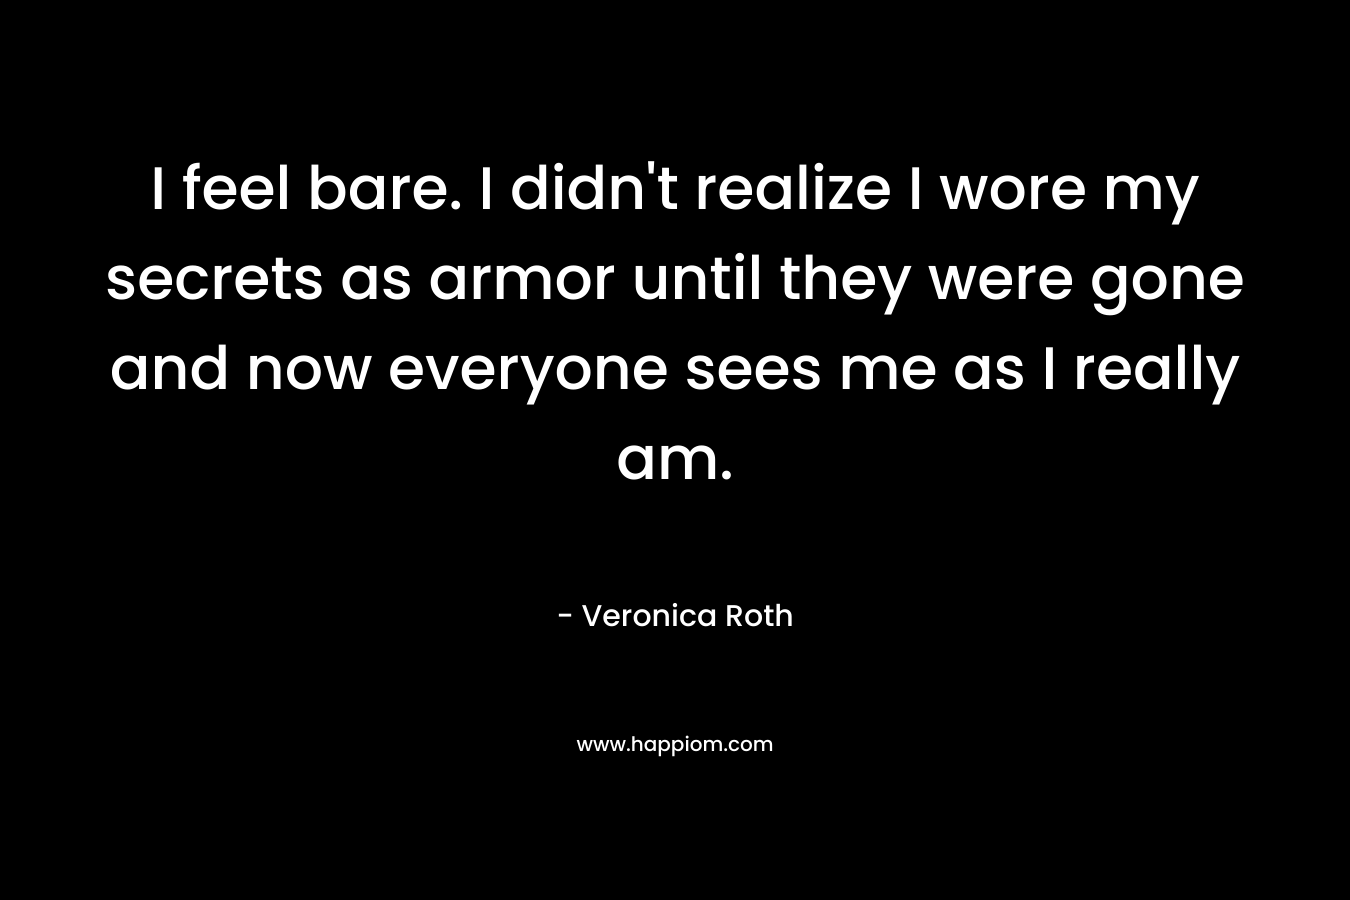 I feel bare. I didn’t realize I wore my secrets as armor until they were gone and now everyone sees me as I really am. – Veronica Roth